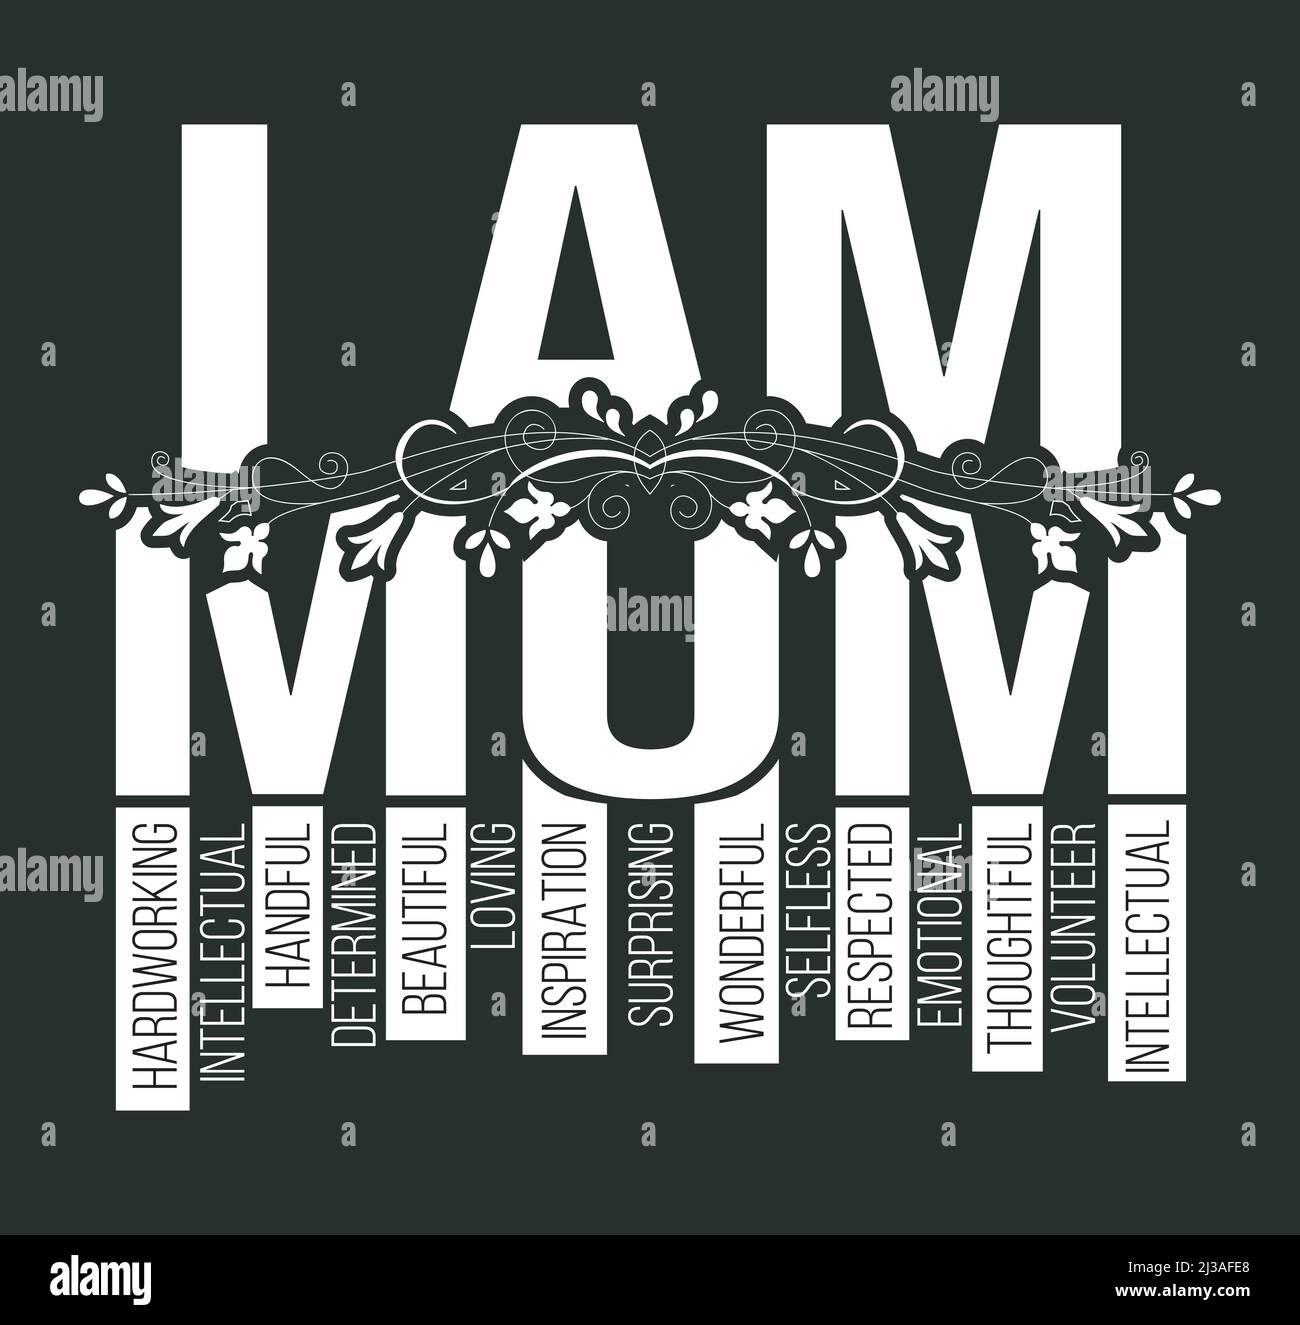 Mothers day svg sublimation tshirt design Stock Vector